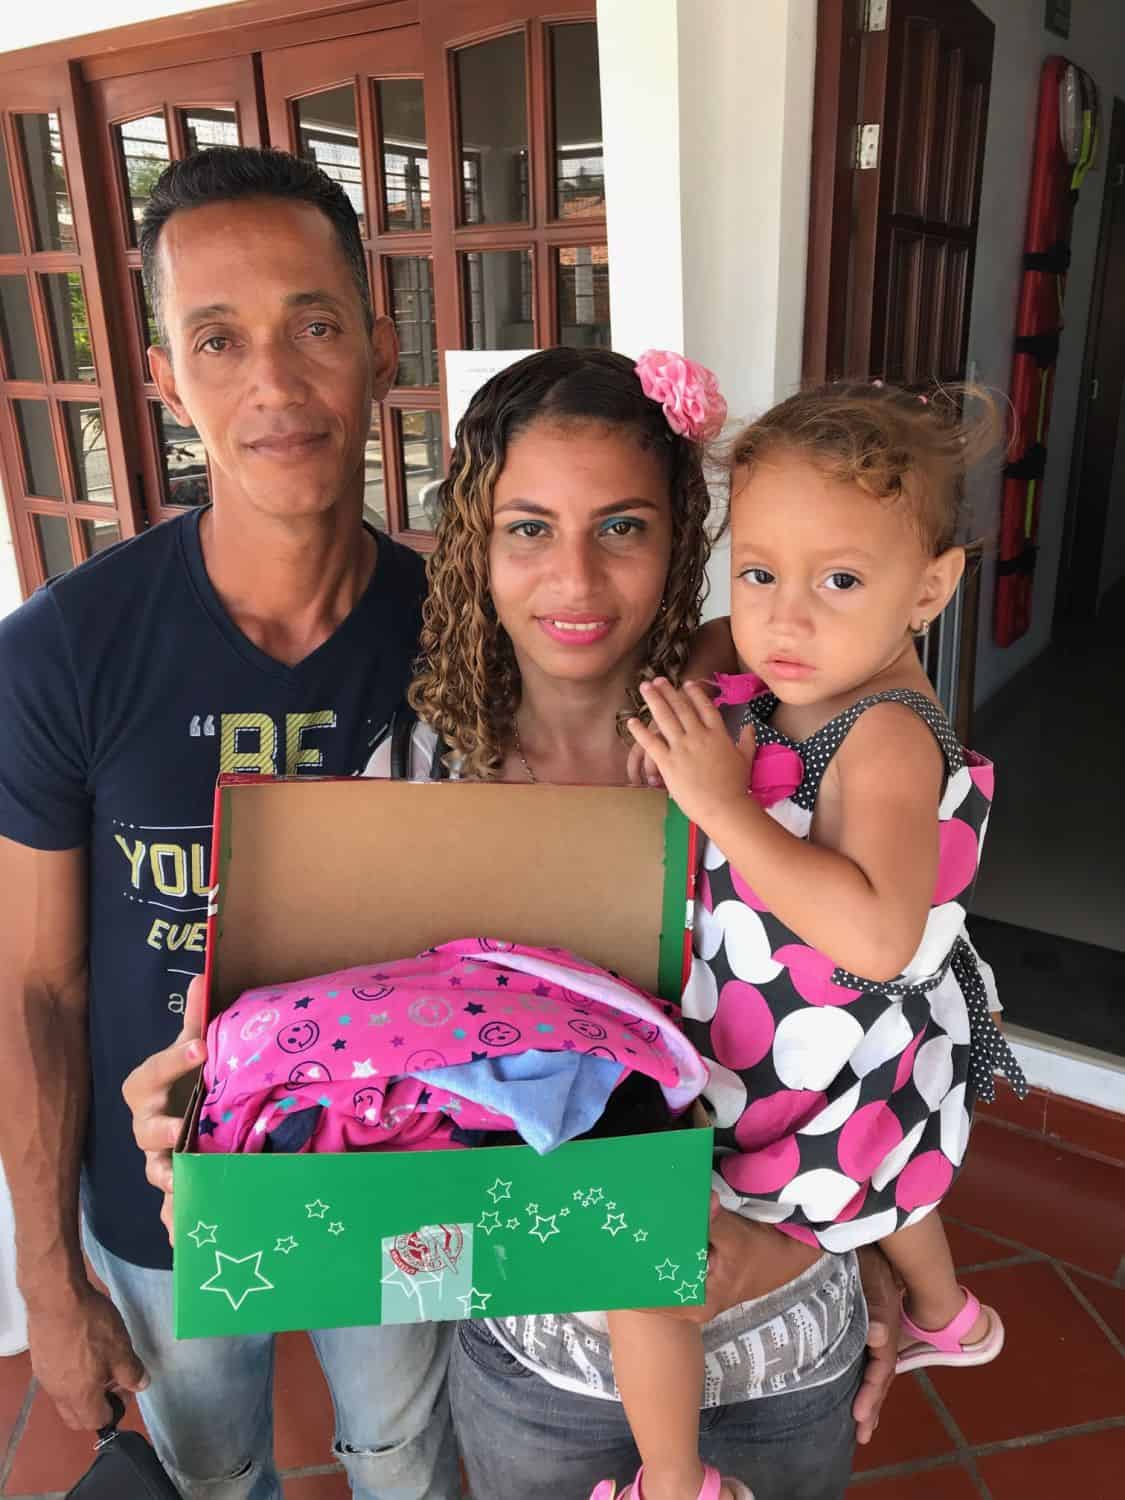 Estela with her parents, and the shoebox containing new clothes justs her size.